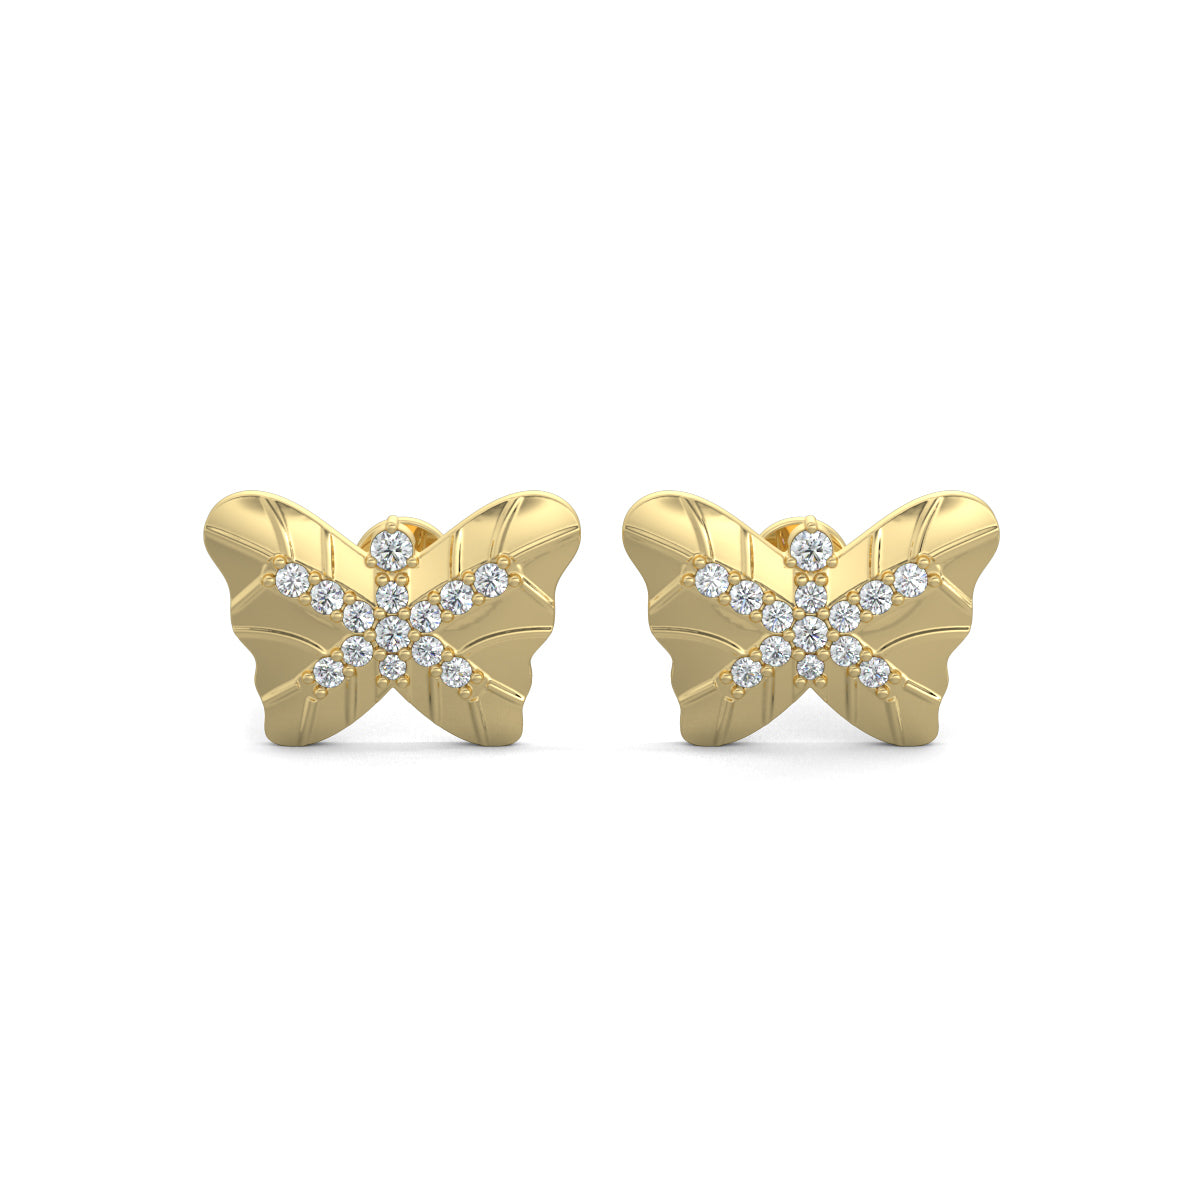 Yellow Gold, Diamond stud earrings, butterfly shape, natural diamonds, lab-grown diamonds, exquisite jewelry, elegant earrings, shimmering diamonds, sophisticated design